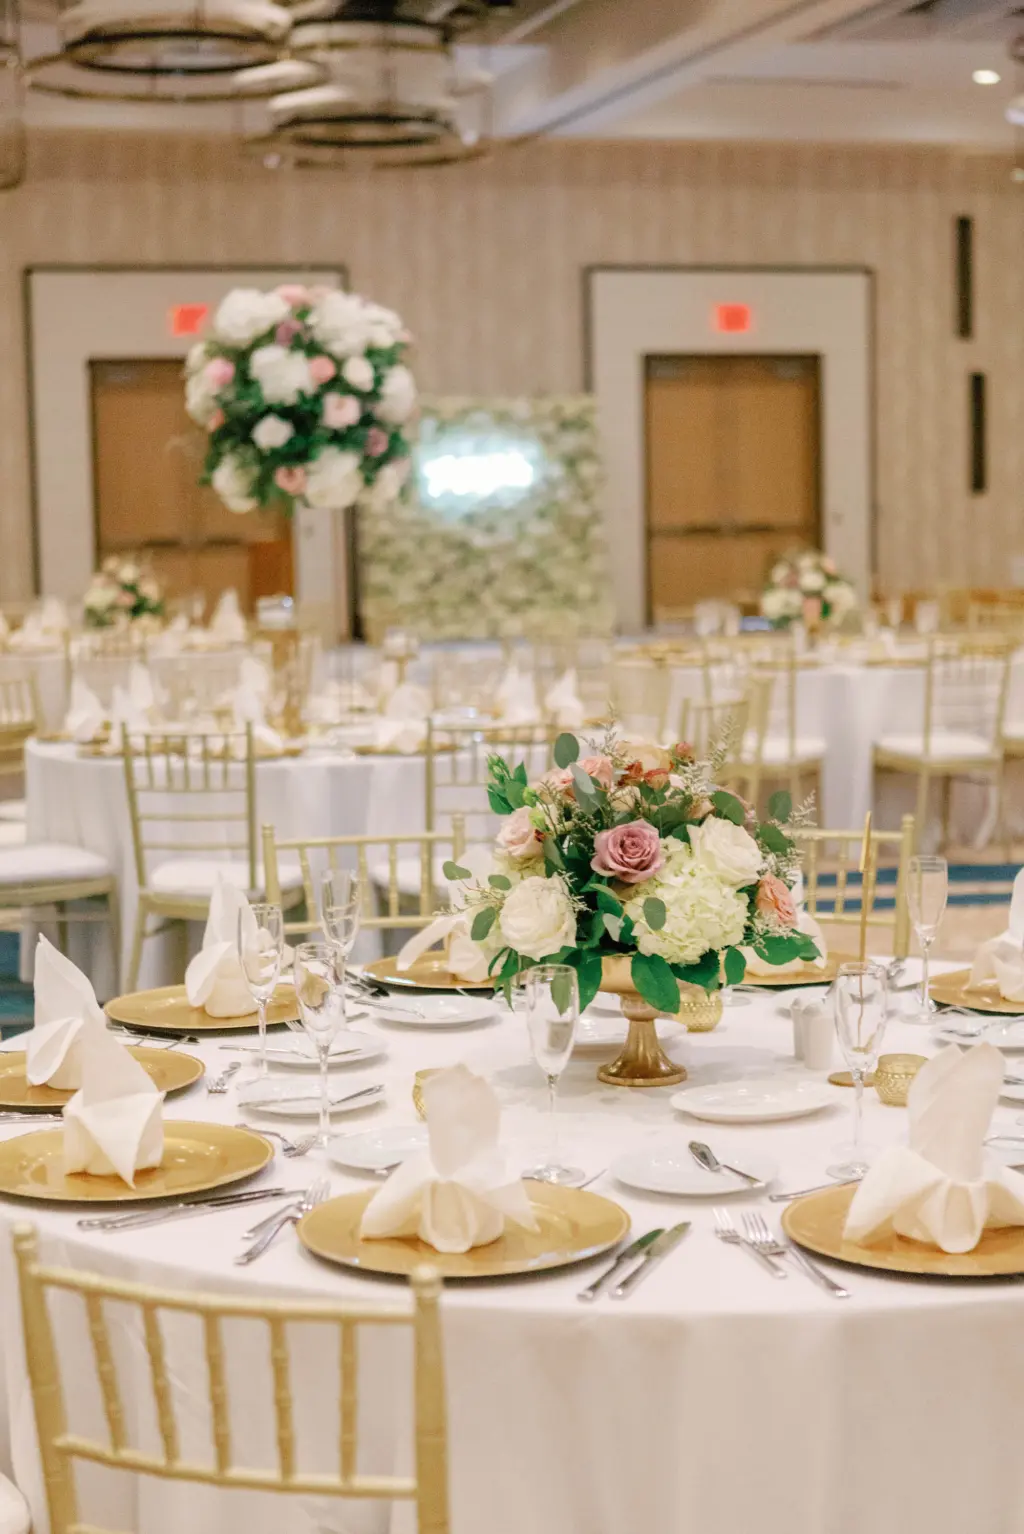 Gold Elegant Wedding Reception with Gold Chiavari Chairs, White and Pink Centerpiece Ballroom Inspiration